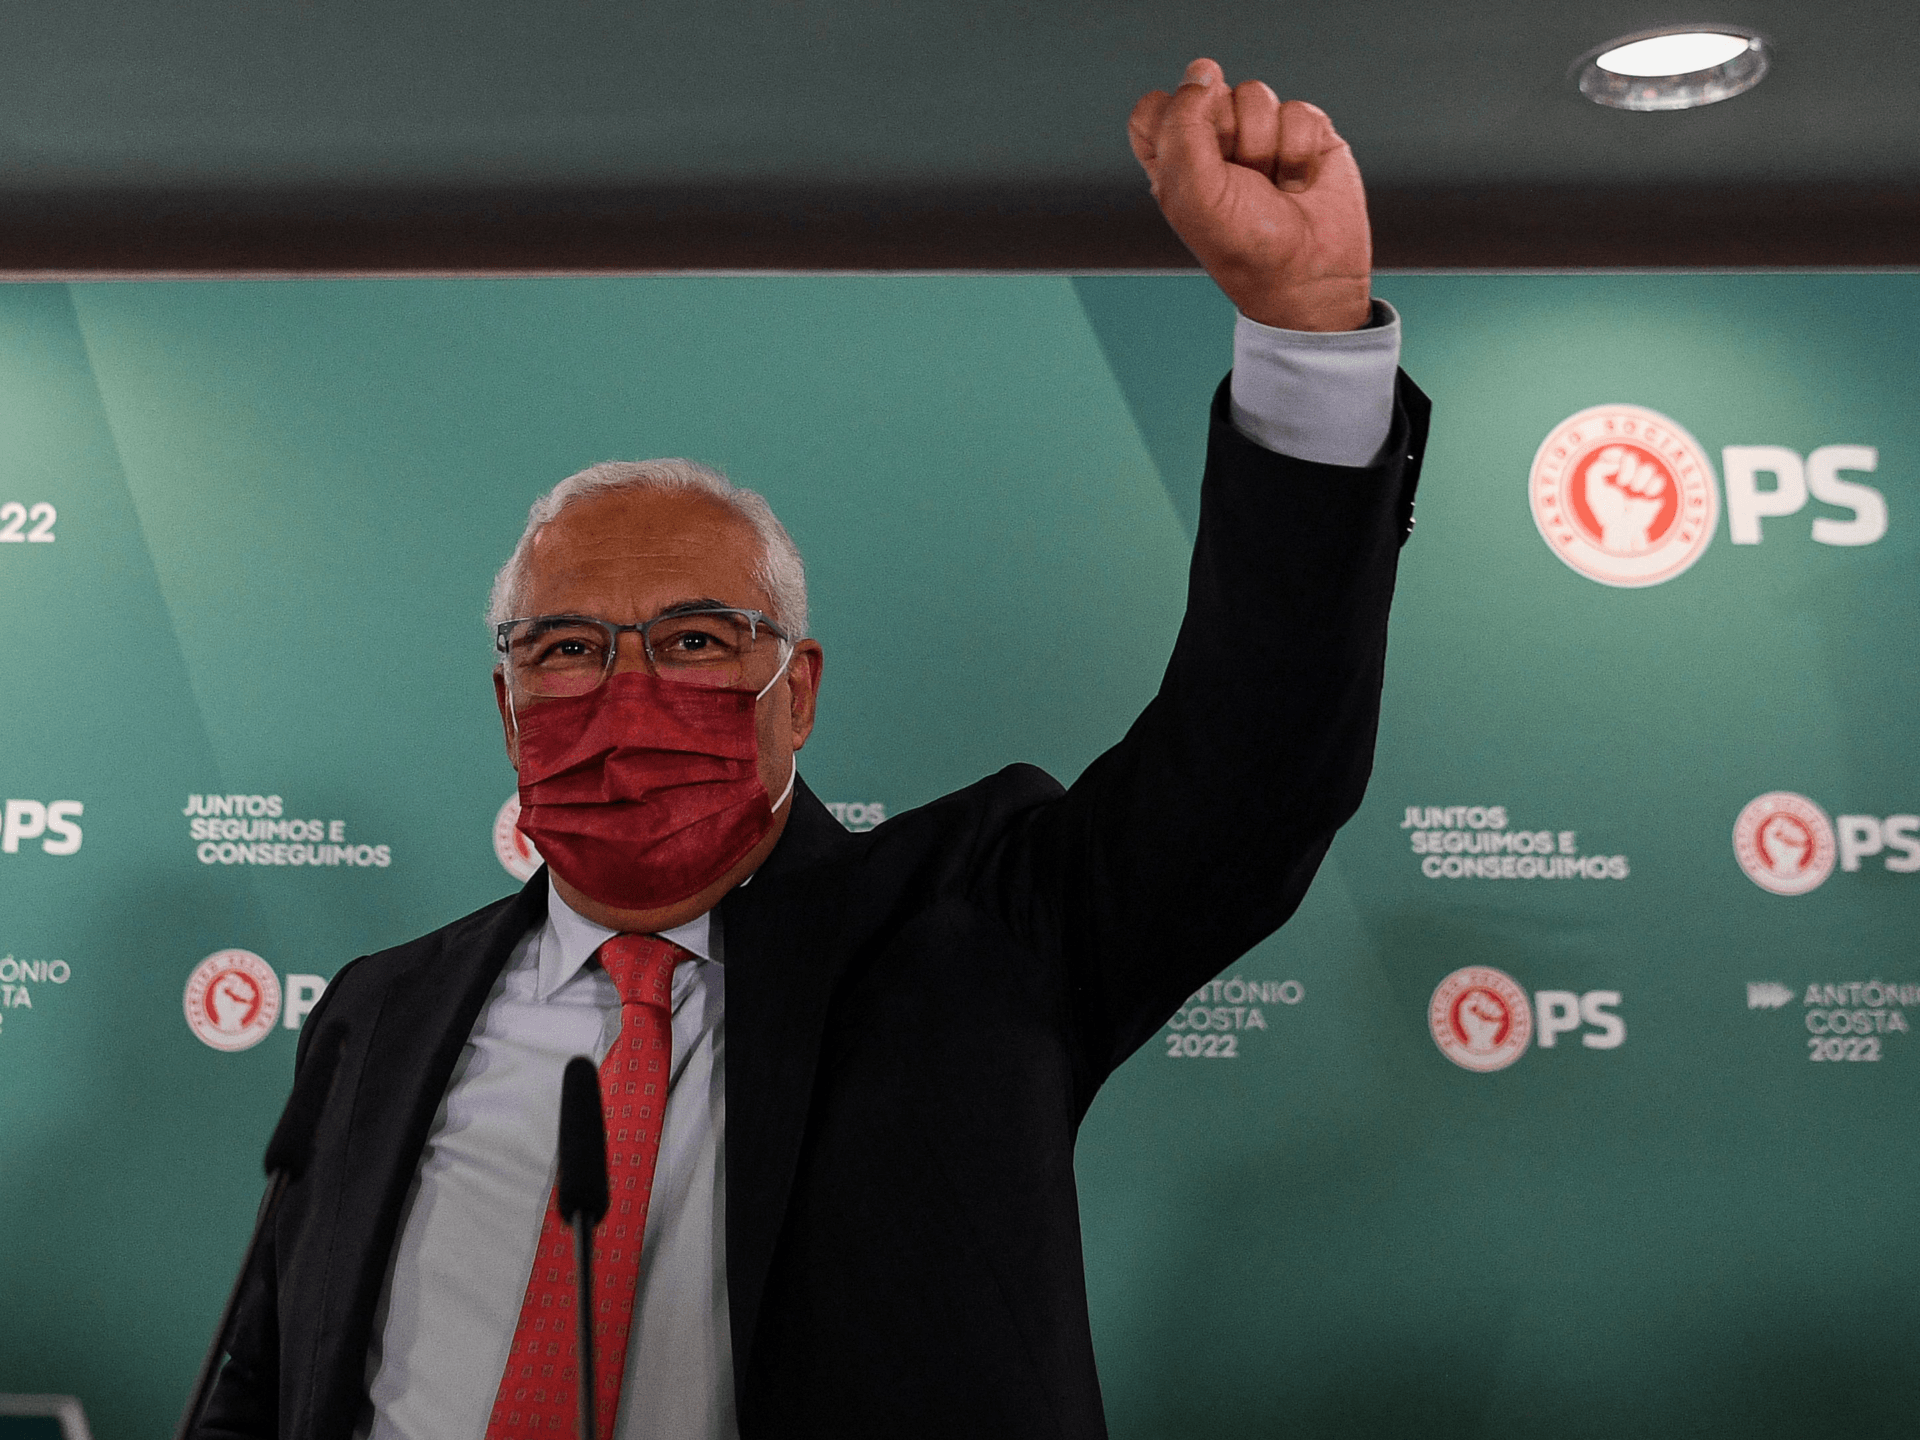 Portuguese incumbent Prime Minister and leader of the Socialist party (PS) Antonio Costa gestures as he arrives to deliver a speech after the announcement of the exit polls at the Socialist Party campaign headquarters on the election night in Lisbon on January 30, 2022. - Portugal's Socialist party is projected to win the early election, exit polls showed, predicting the incumbents will take more votes than in 2019 but may still fall short of an outright majority. (Photo by PATRICIA DE MELO MOREIRA / AFP) (Photo by PATRICIA DE MELO MOREIRA/AFP via Getty Images)